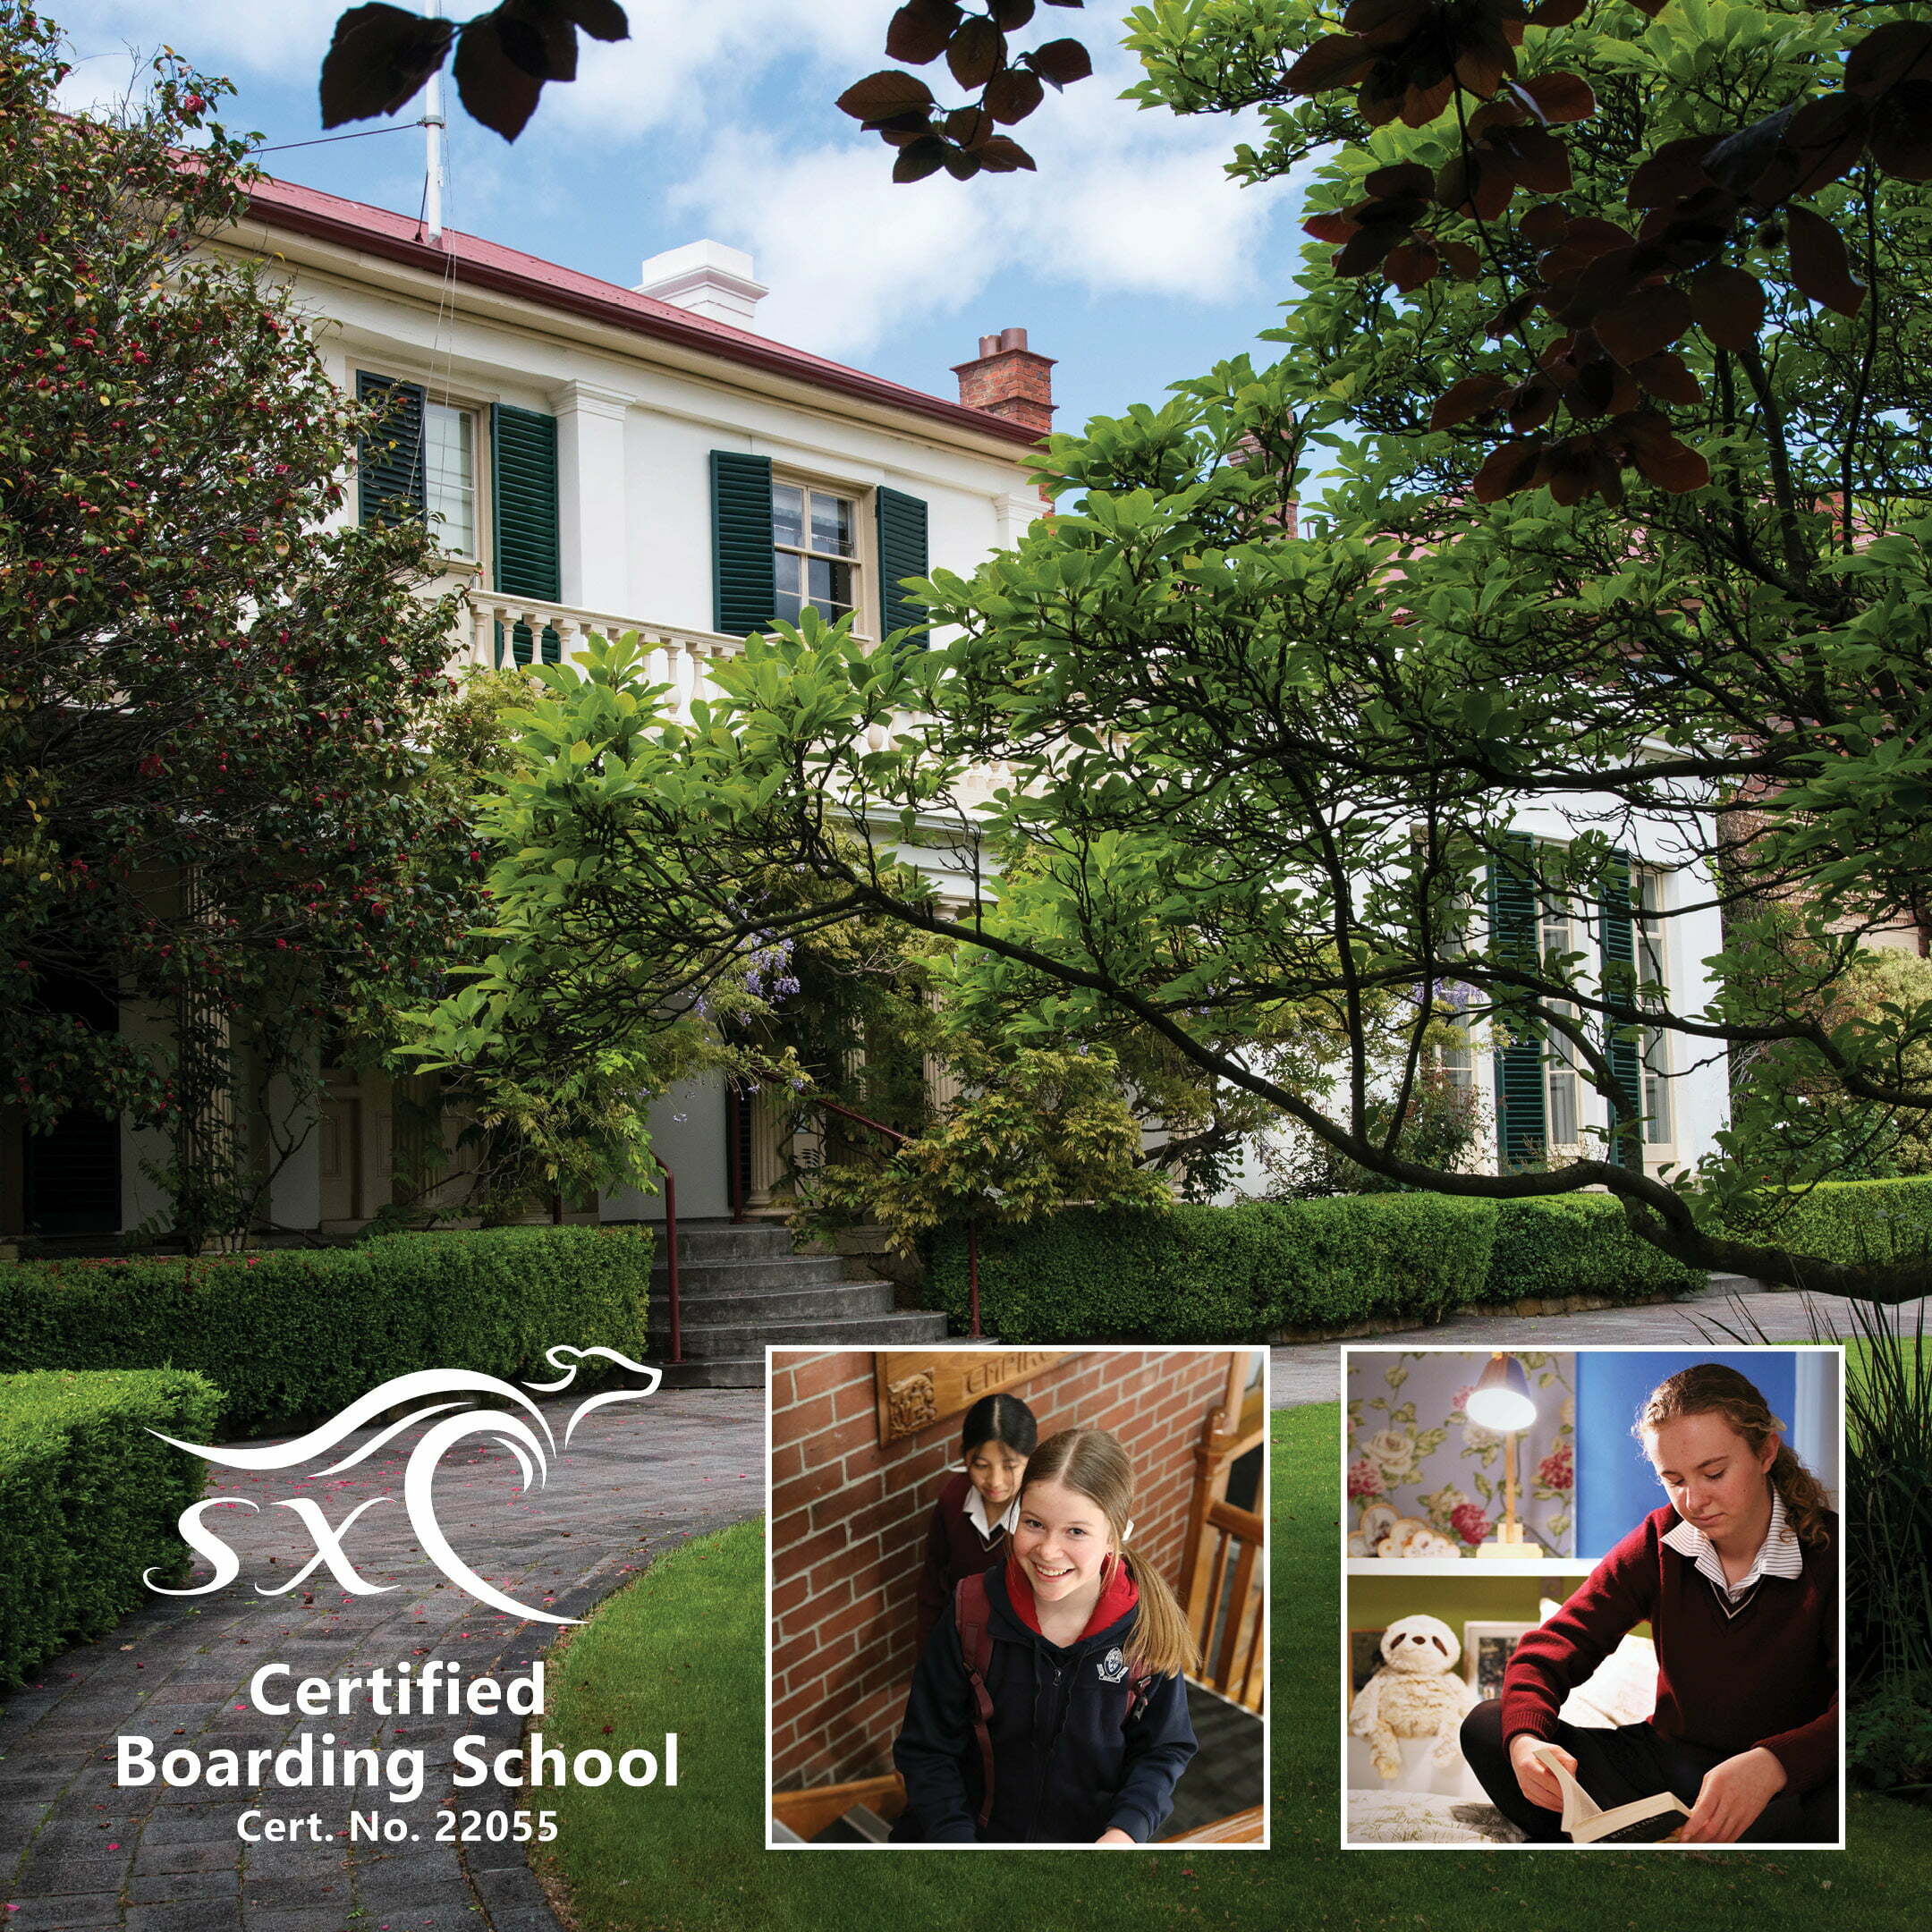 Photo of the front of the boarding house with the SXC logo and text Certified Boarding School Cert. No. 22055